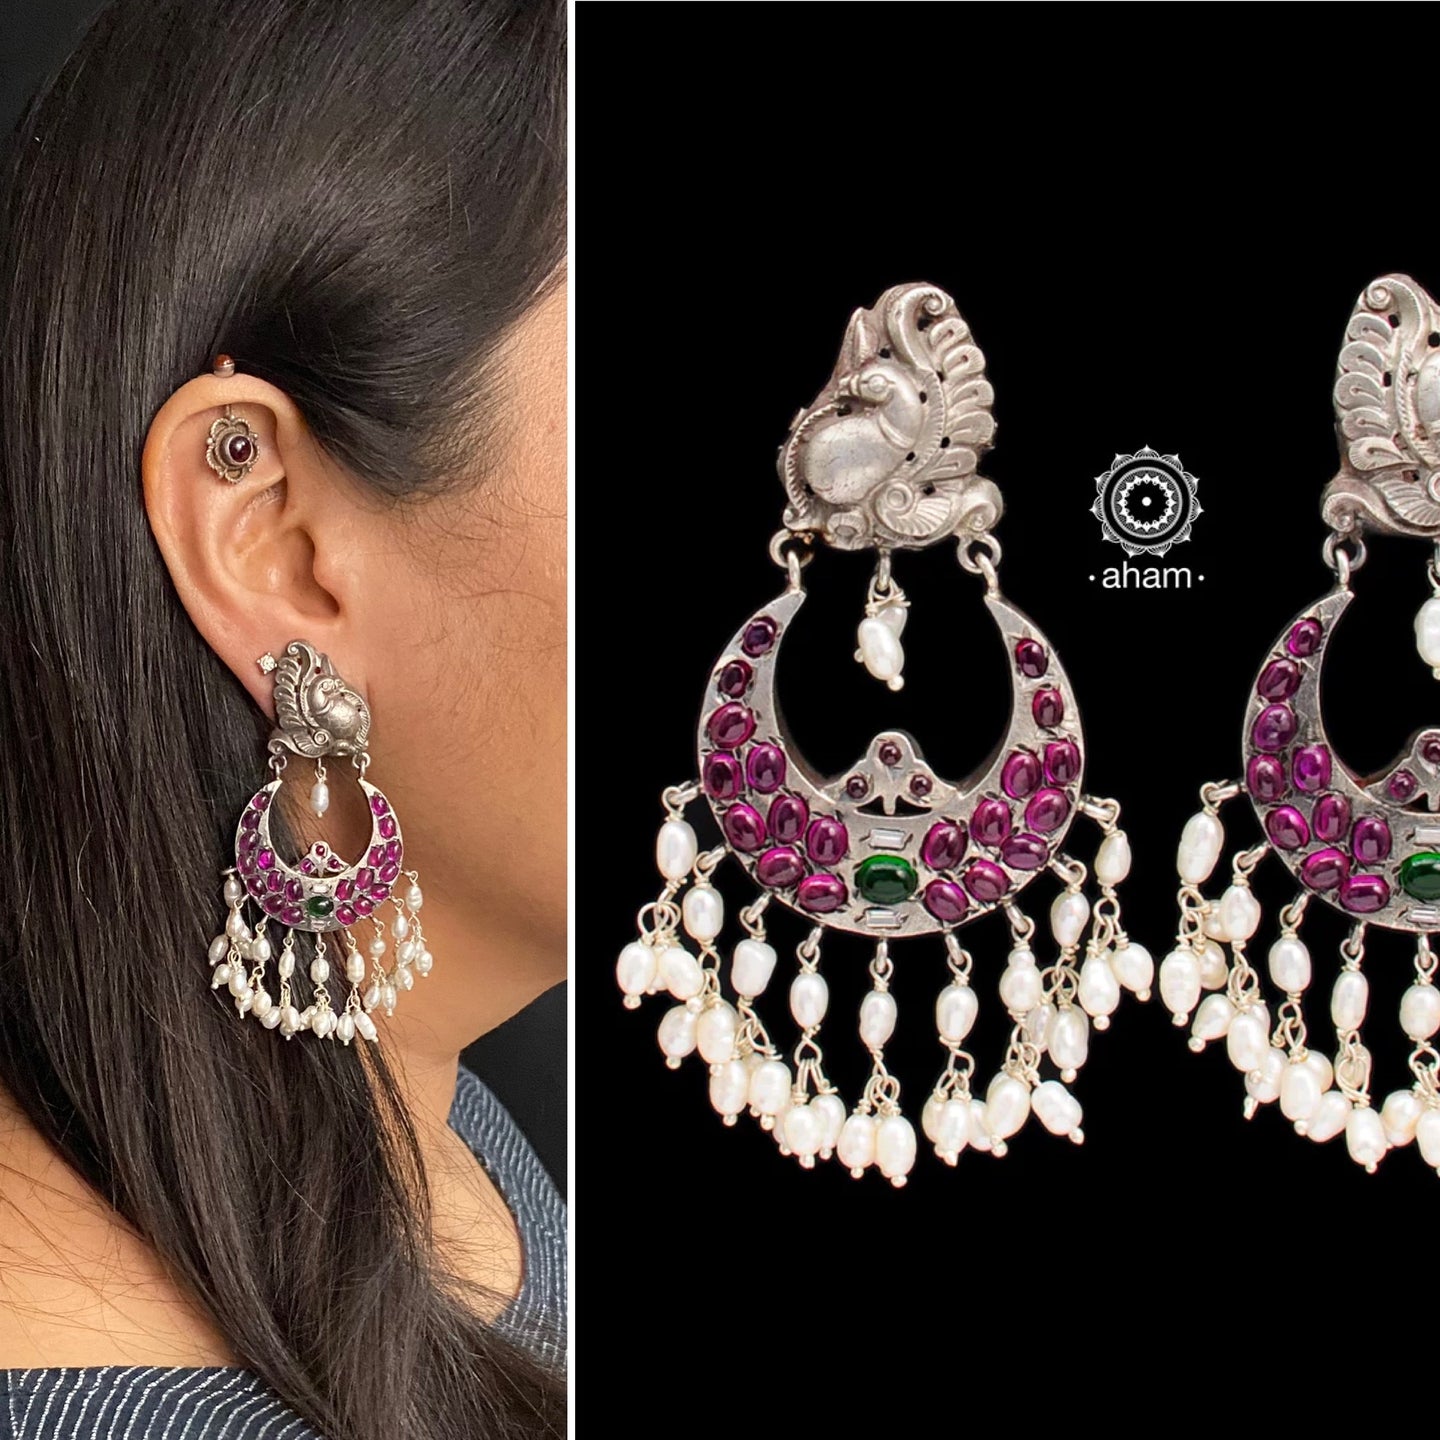 Handcrafted pair of Nrityam chandbali earrings in 92.5 sterling silver with Nakshi peacock stud, maroon kemp stone setting and hanging cultured pearls. 